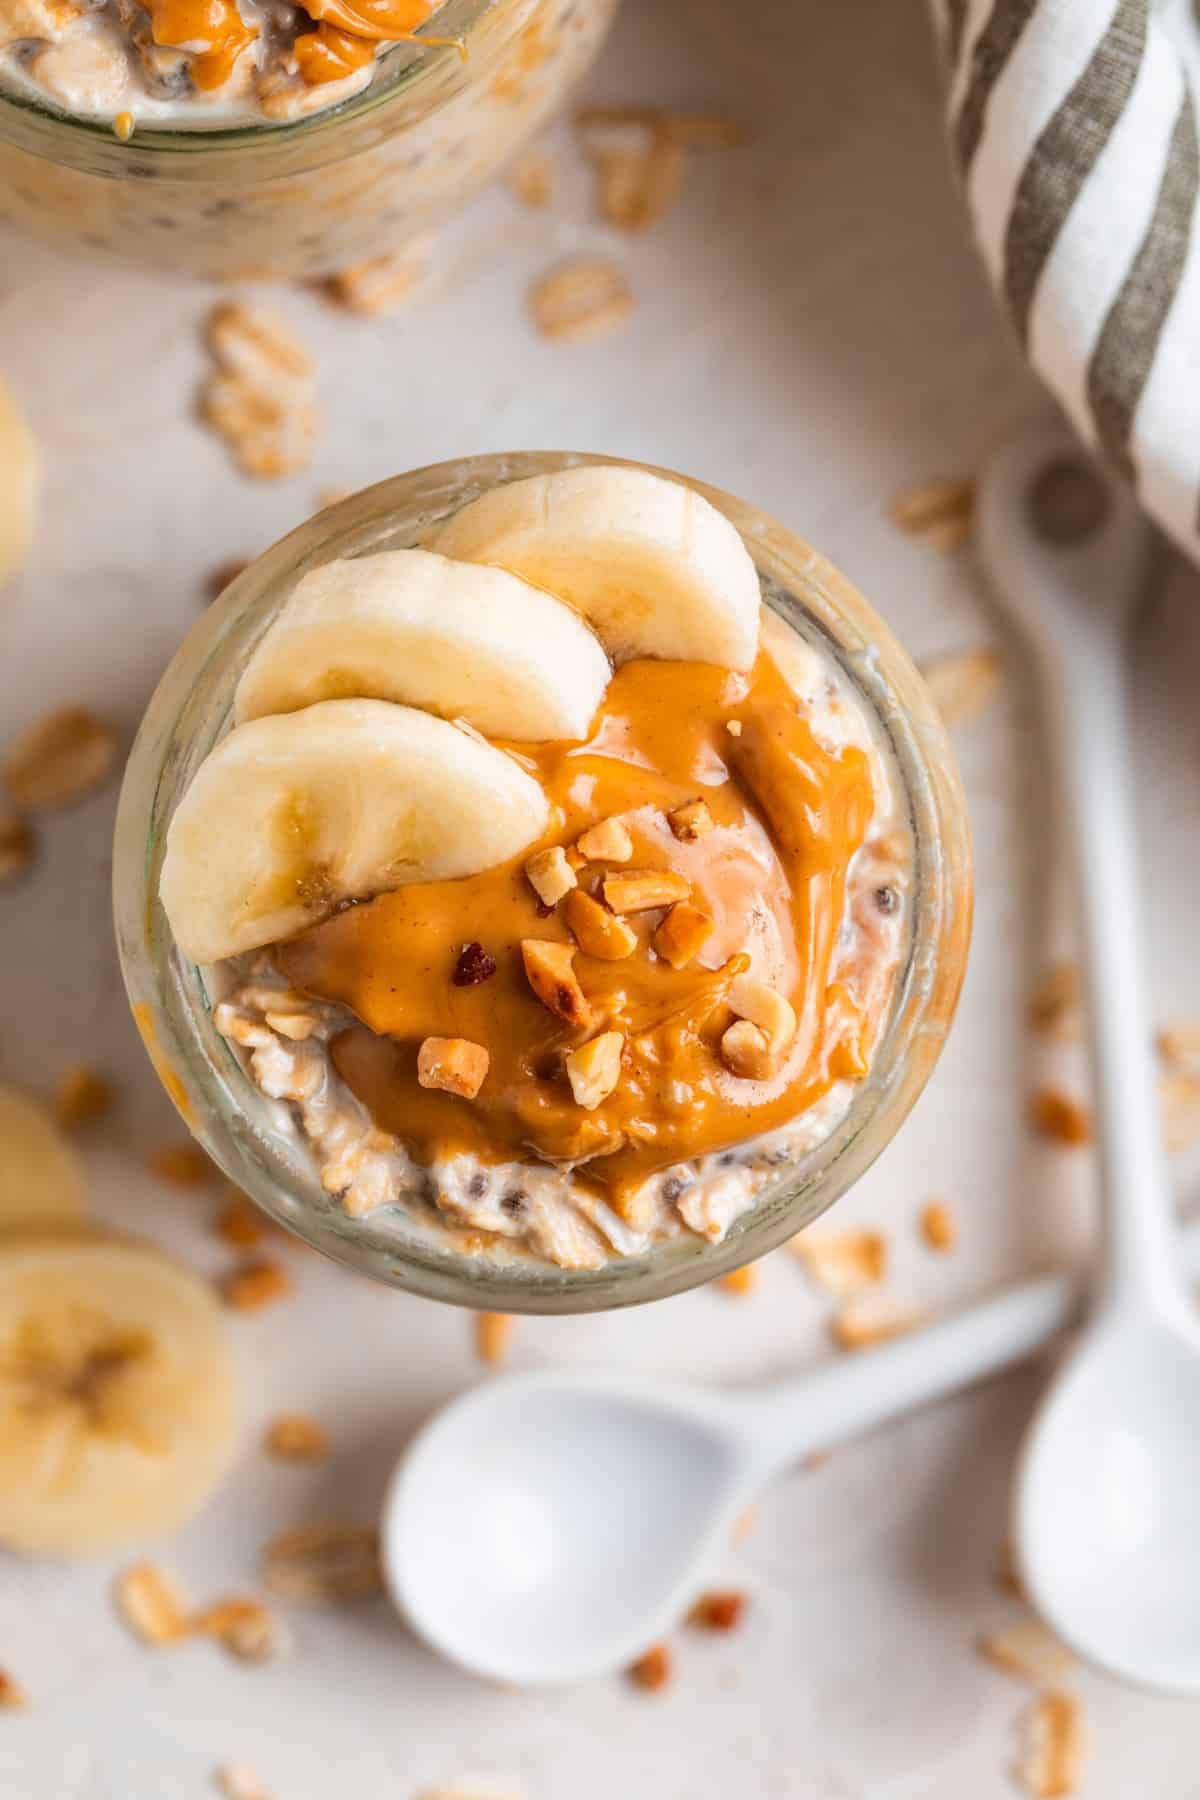 Overhead view of oatmeal topped with sliced bananas and peanut butter with white spoon and rolled oats surrounding.